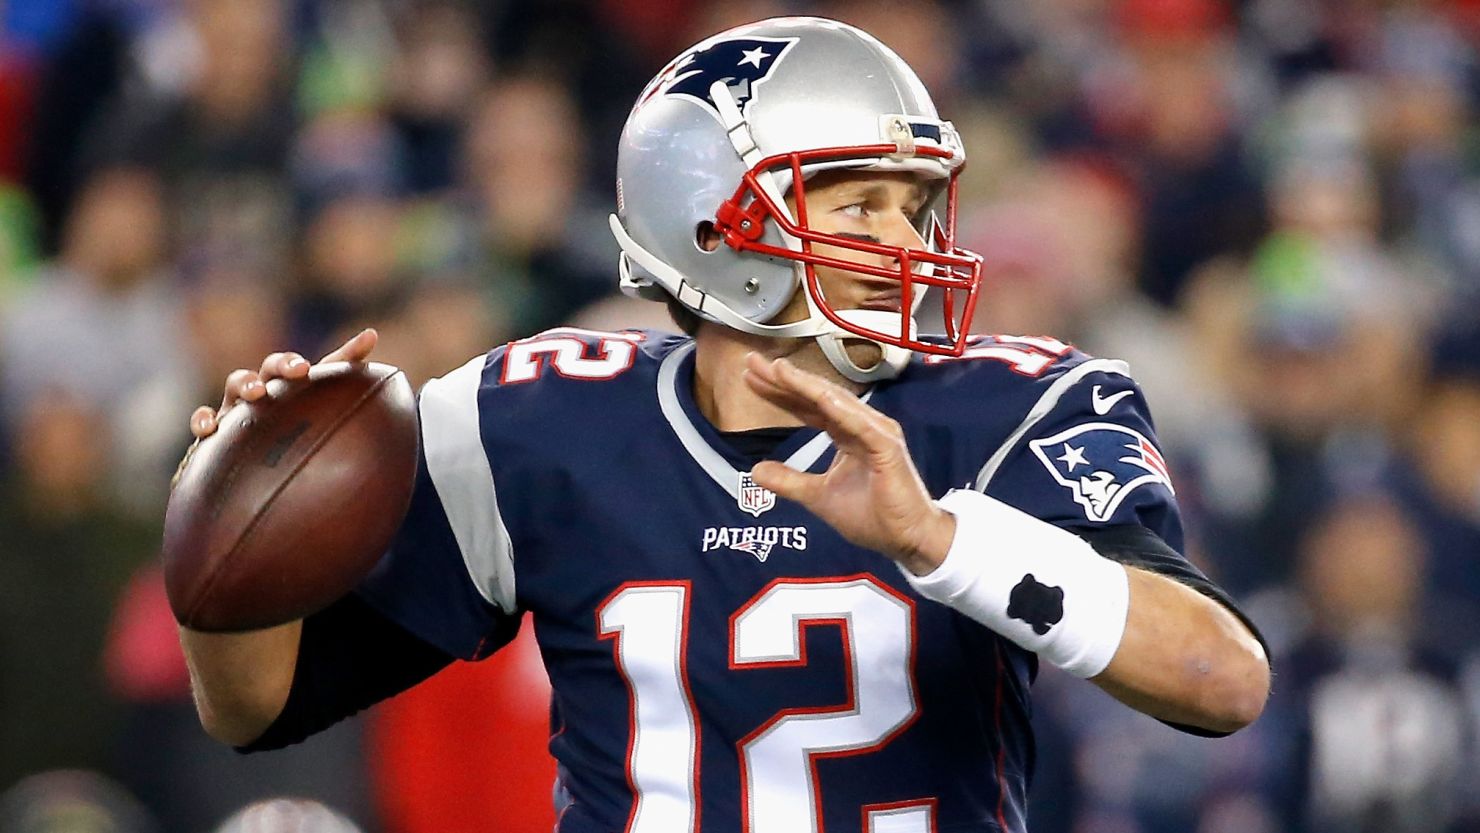 The Patriots' Tom Brady is just one of the fabulous four quarterbacks taking the field in the championship games Sunday.